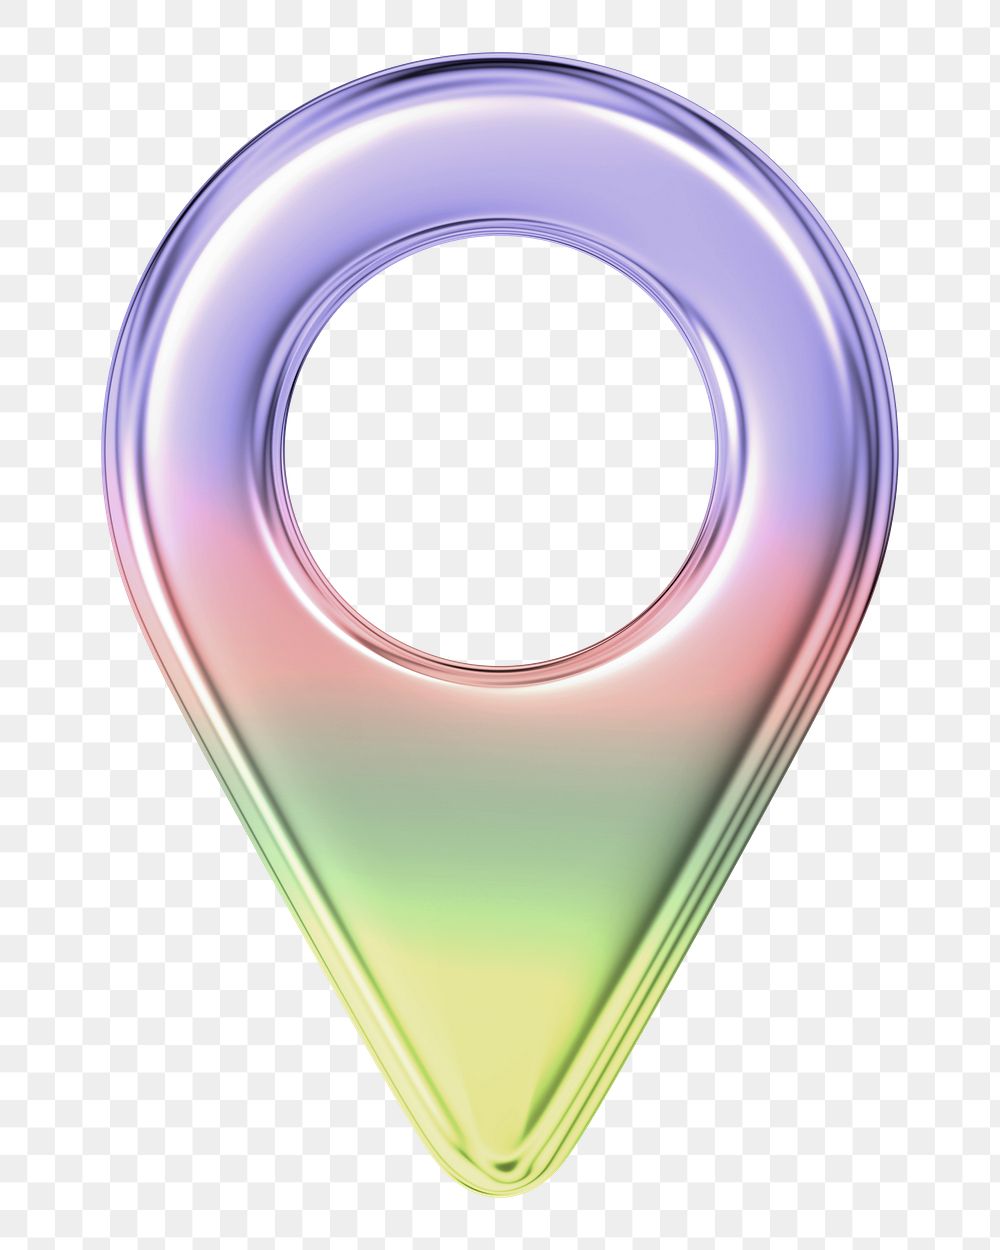 Location pin  icon png holographic fluid chrome shape, transparent background